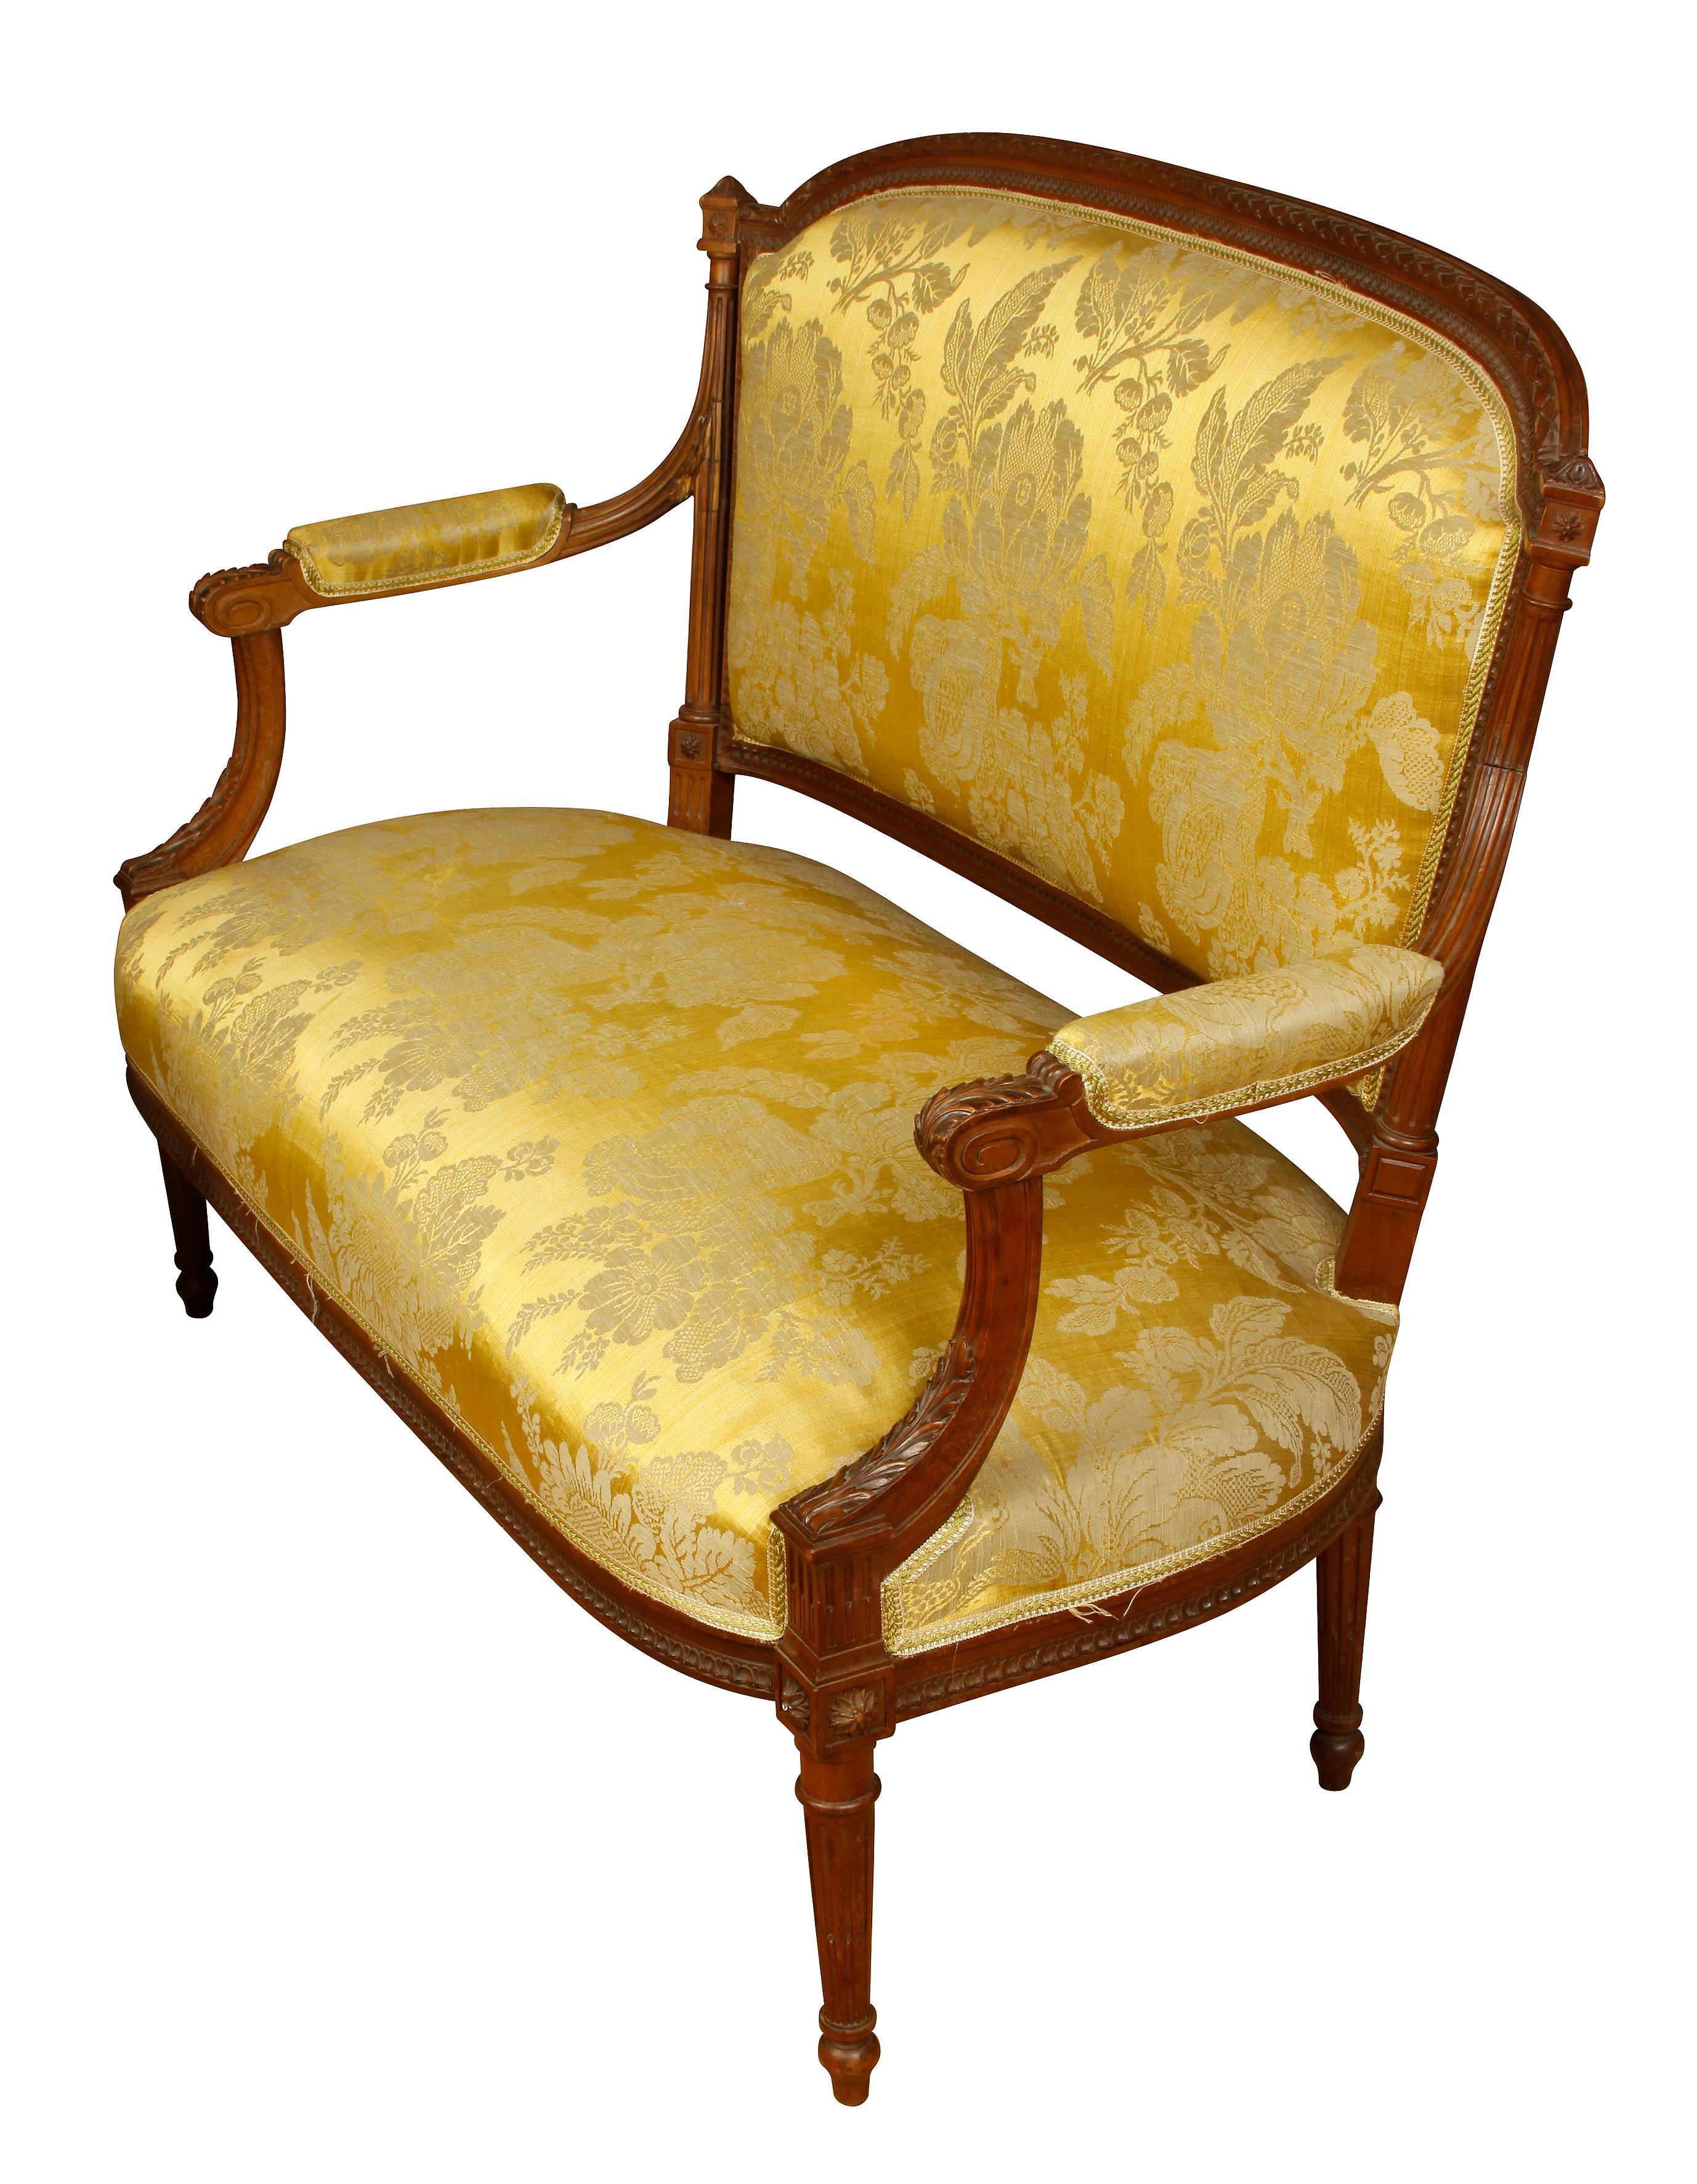 Louis XVI beechwood settee in Damask silk with carved arms and legs.